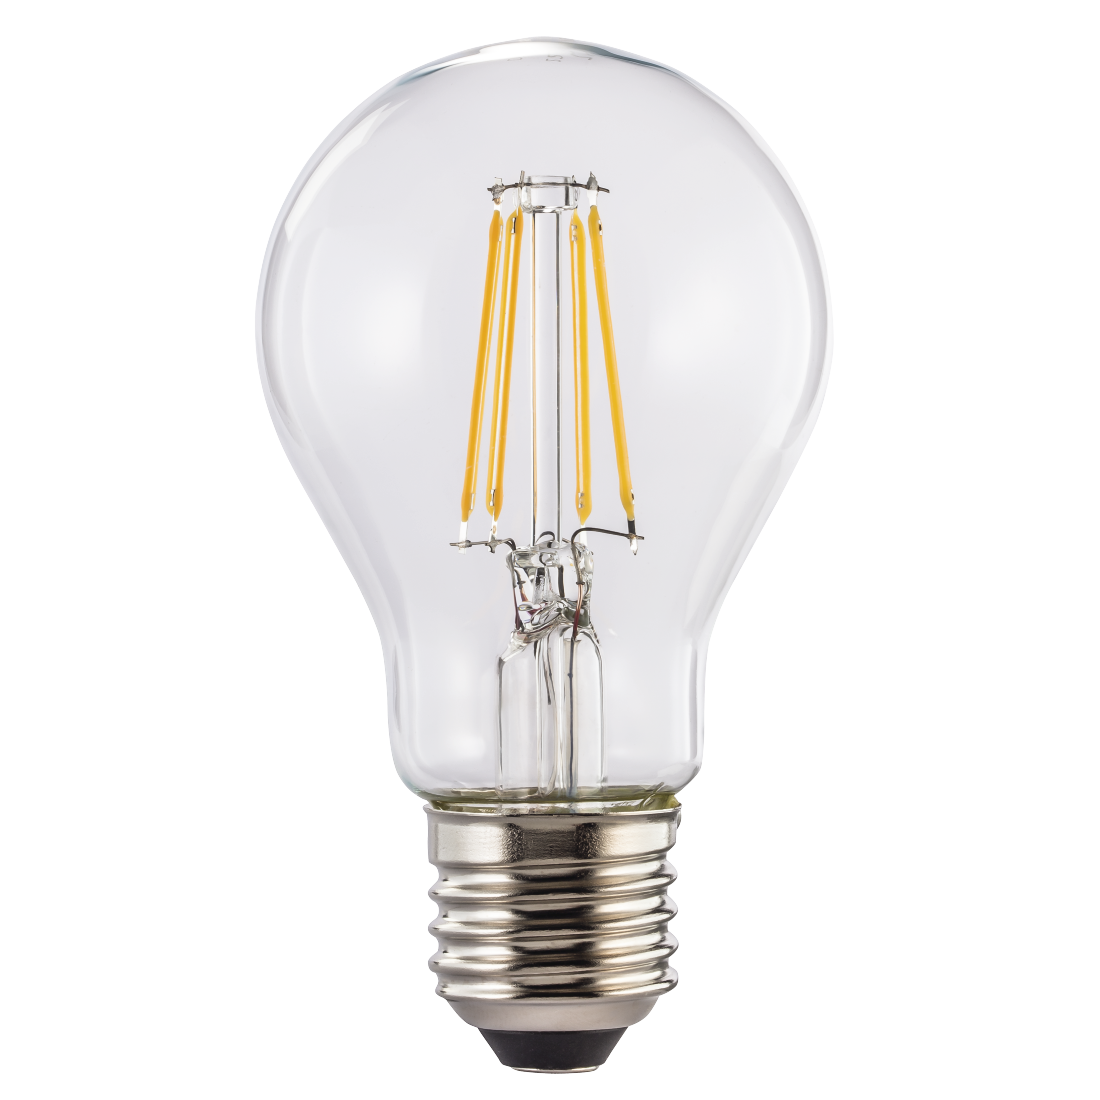 abx High-Res Image - Xavax, LED Filament, E27, 1055 lm Replaces 75W, Incandescent Bulb, warm white